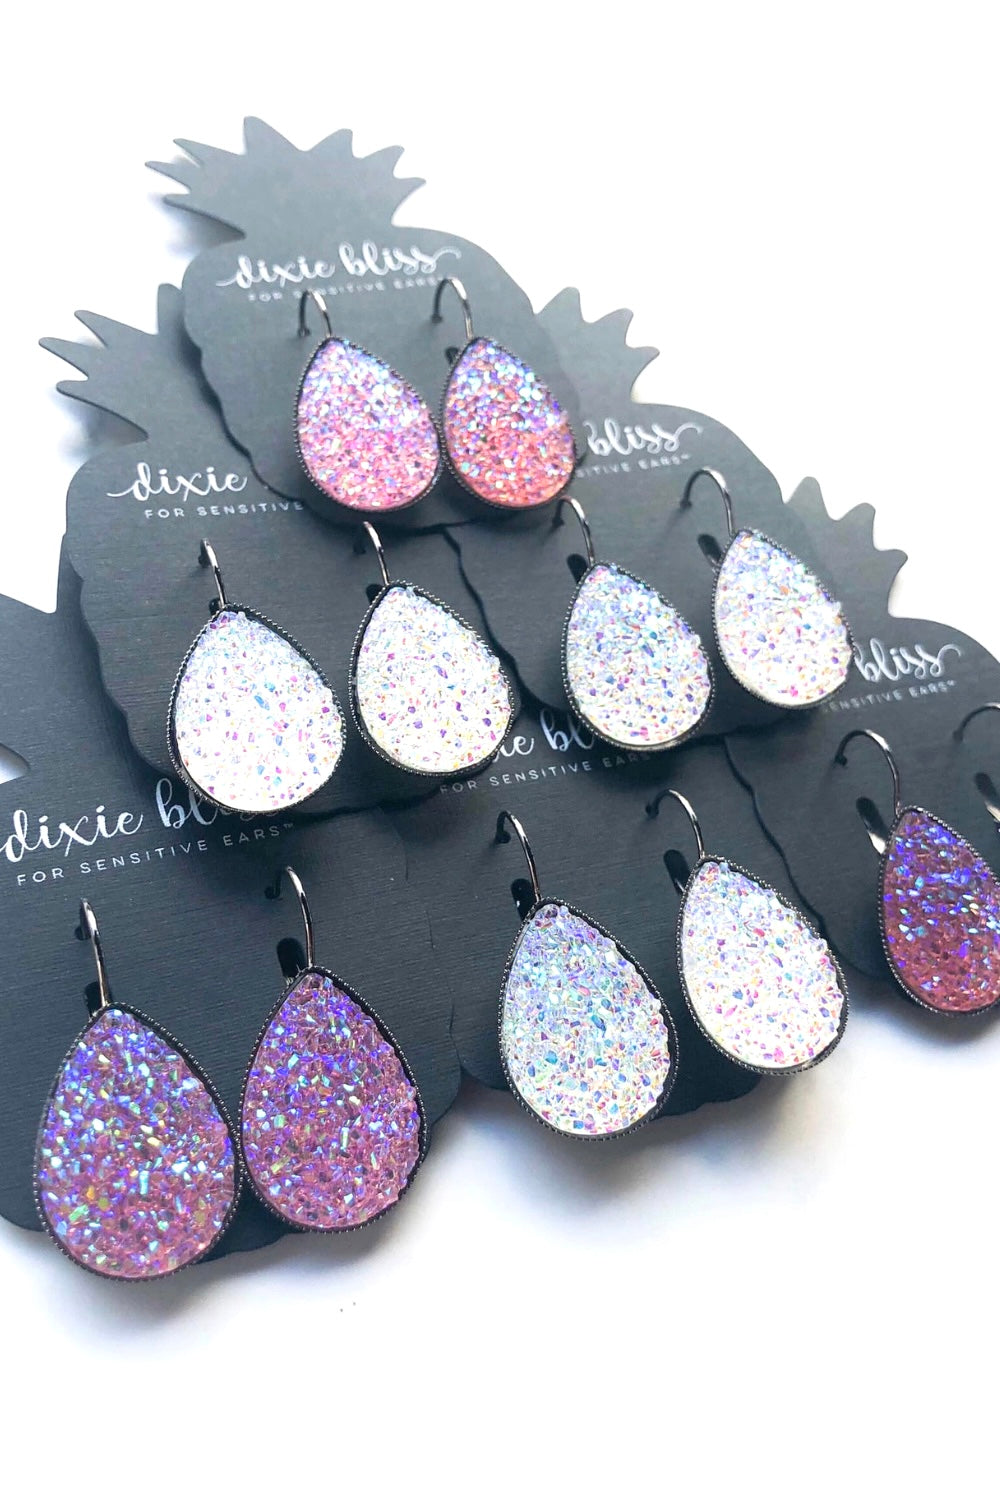 Dixie Bliss Earrings: Iridescent Lovely Lever Backs In Crystal Clear White and also Blush Pink Hypoallergenic made in the USA woman-owned company druzy shiny diamond-like sparkle and shine safe & made for sensitive ears